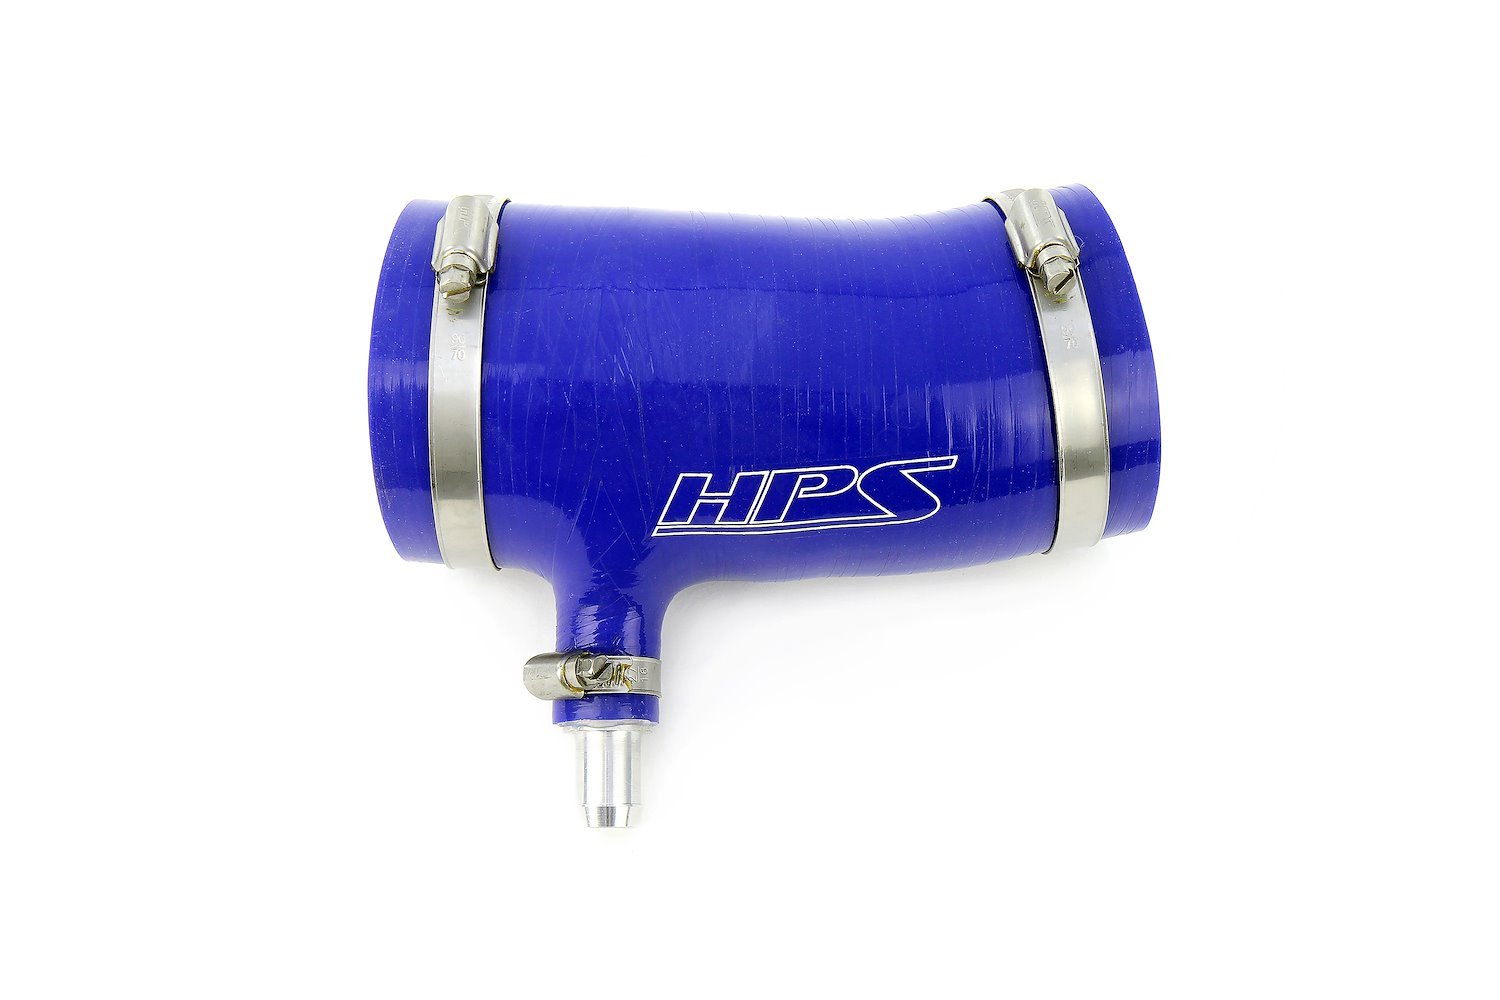 57-2123-BLUE Silicone Air Intake Kit, Replaces Stock Restrictive Air Intake, Improve Throttle Response, No Heat Soak